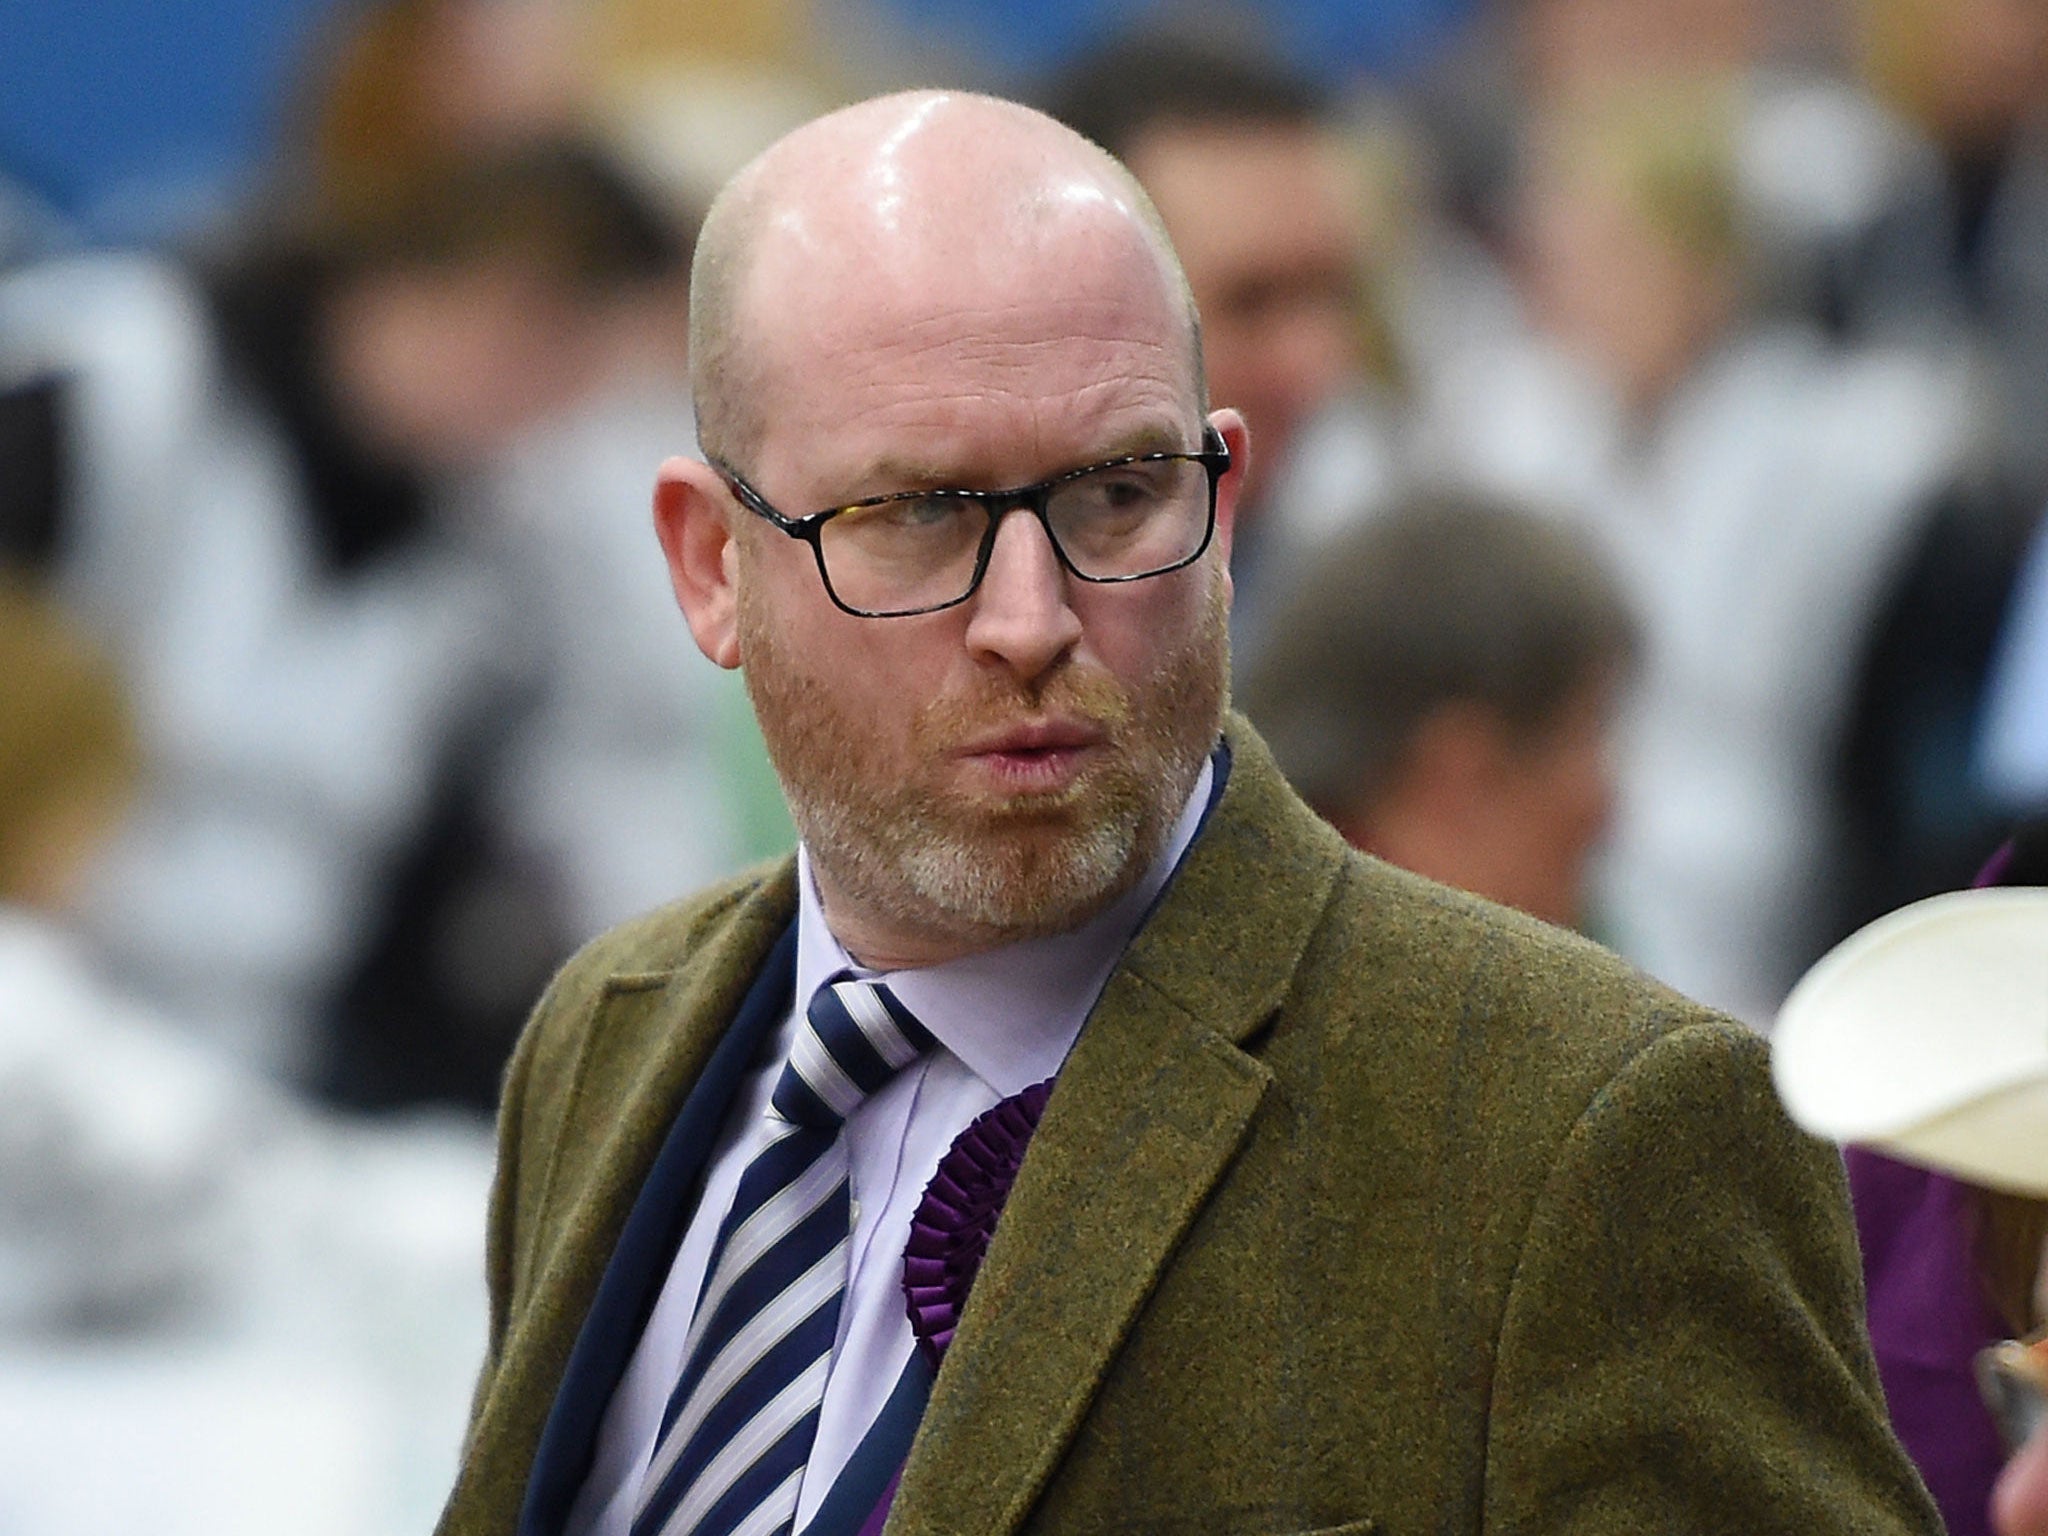 Ukip candidate and party leader Paul Nuttall at the Stoke count